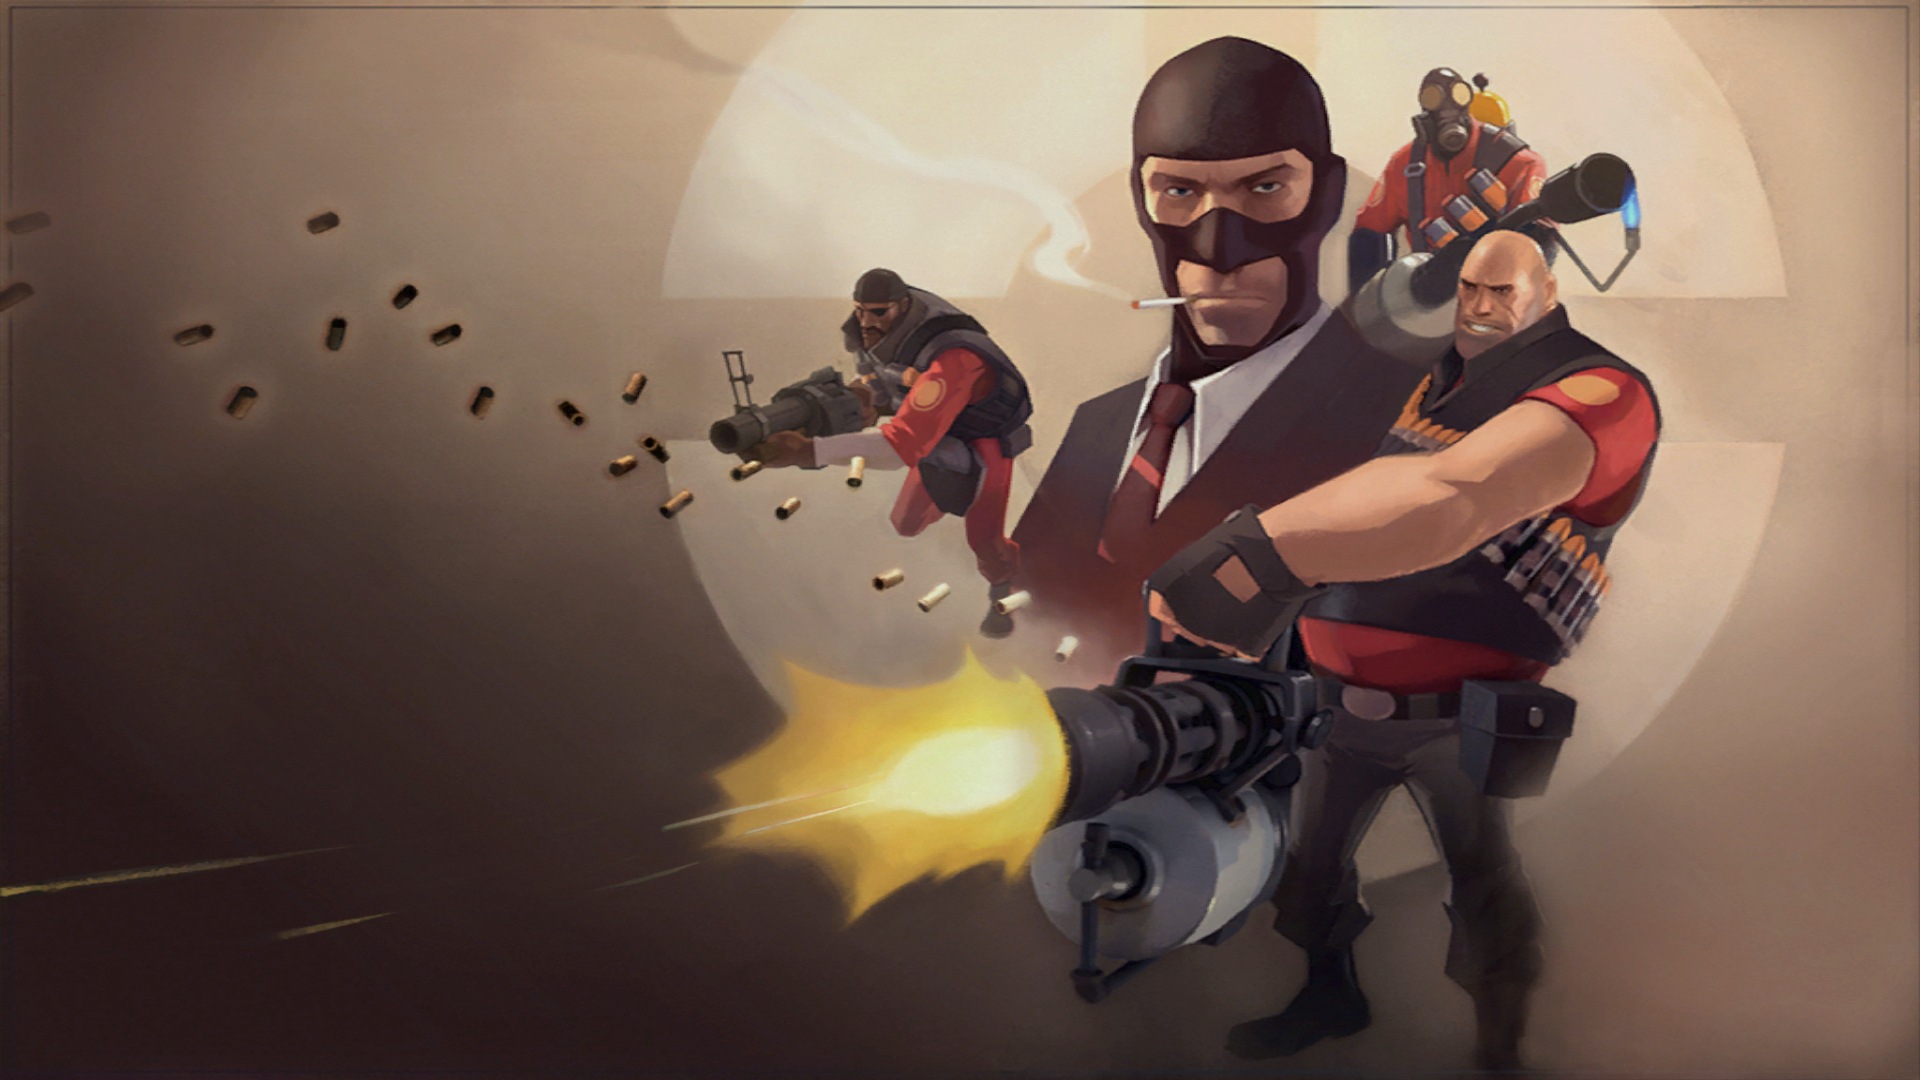 Team Fortress 2008 mod is a time machine for TF2 players